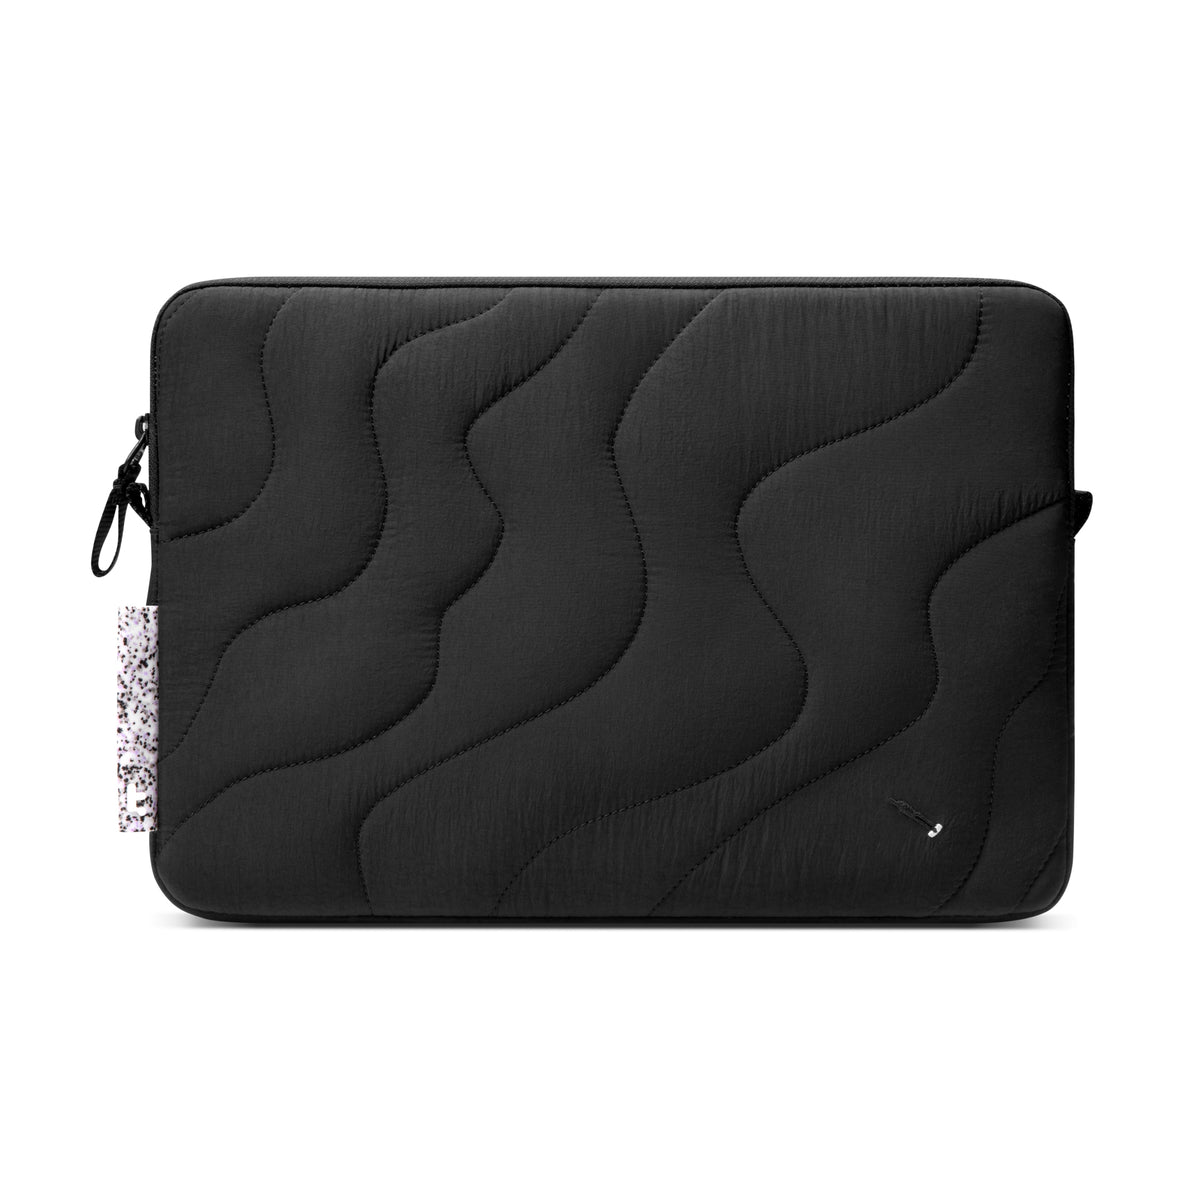 primary_Terra-A27 Laptop Sleeve for 13-inch MacBook